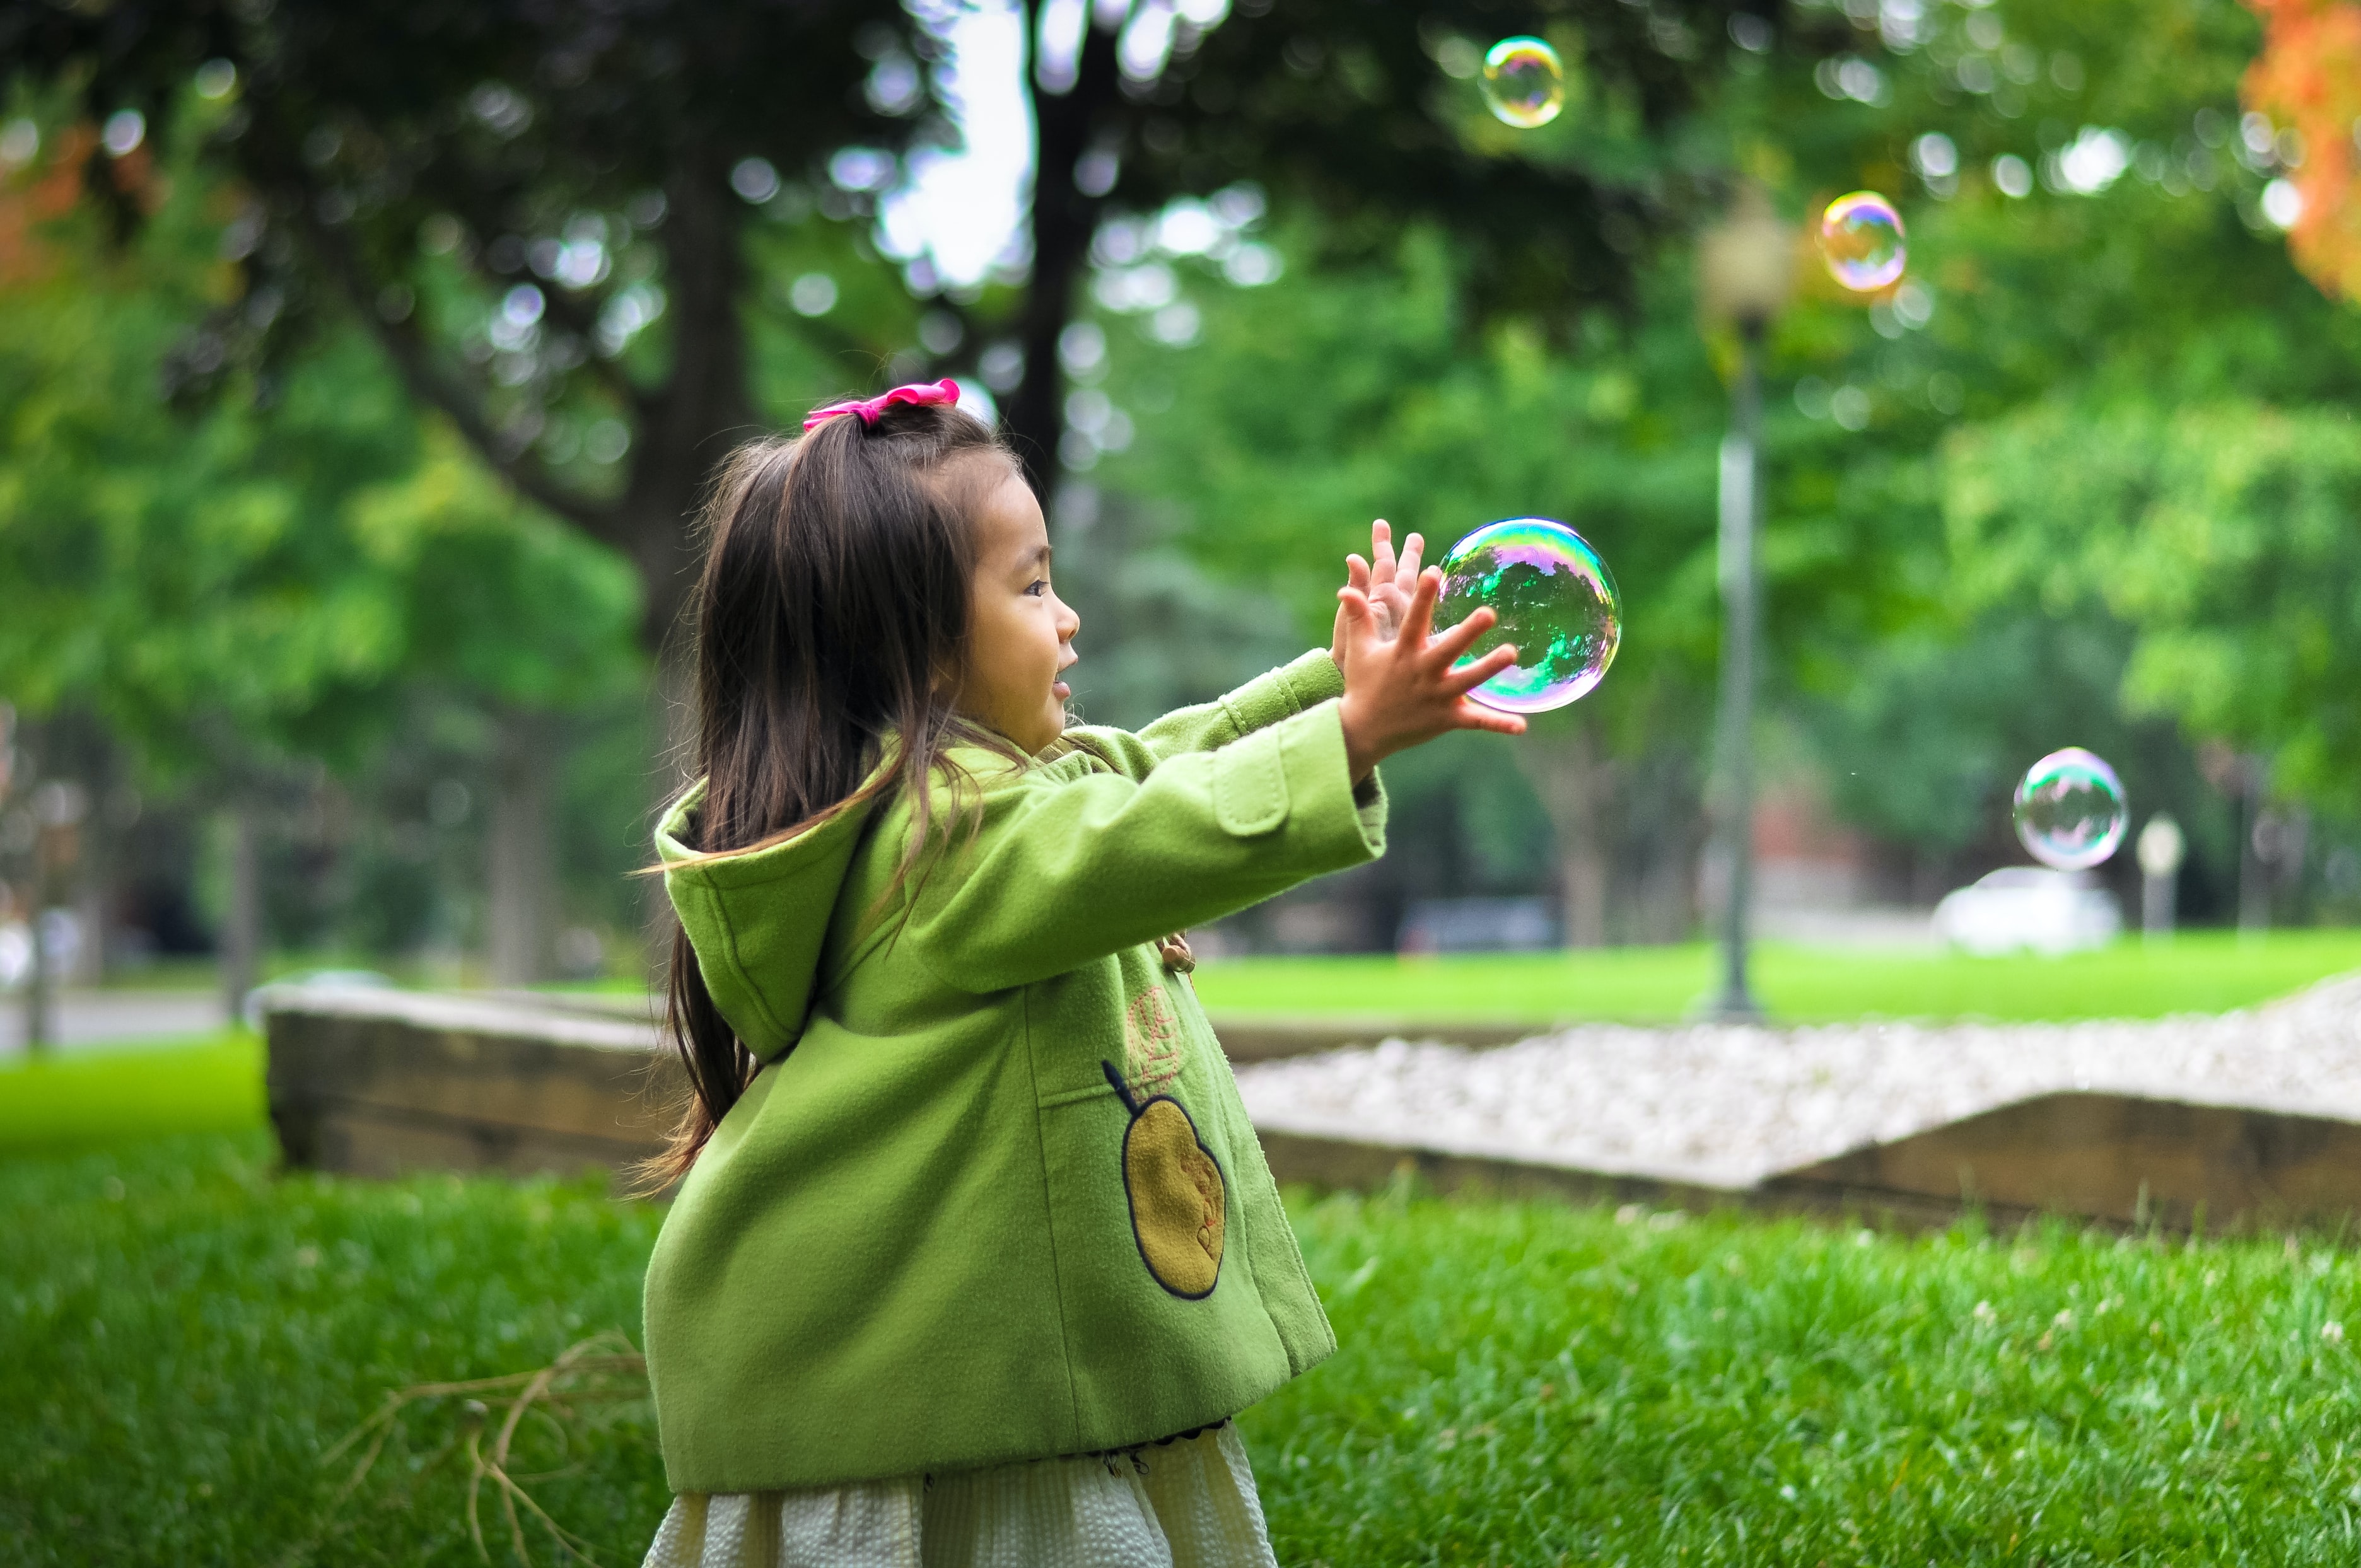 Child with a Bubble